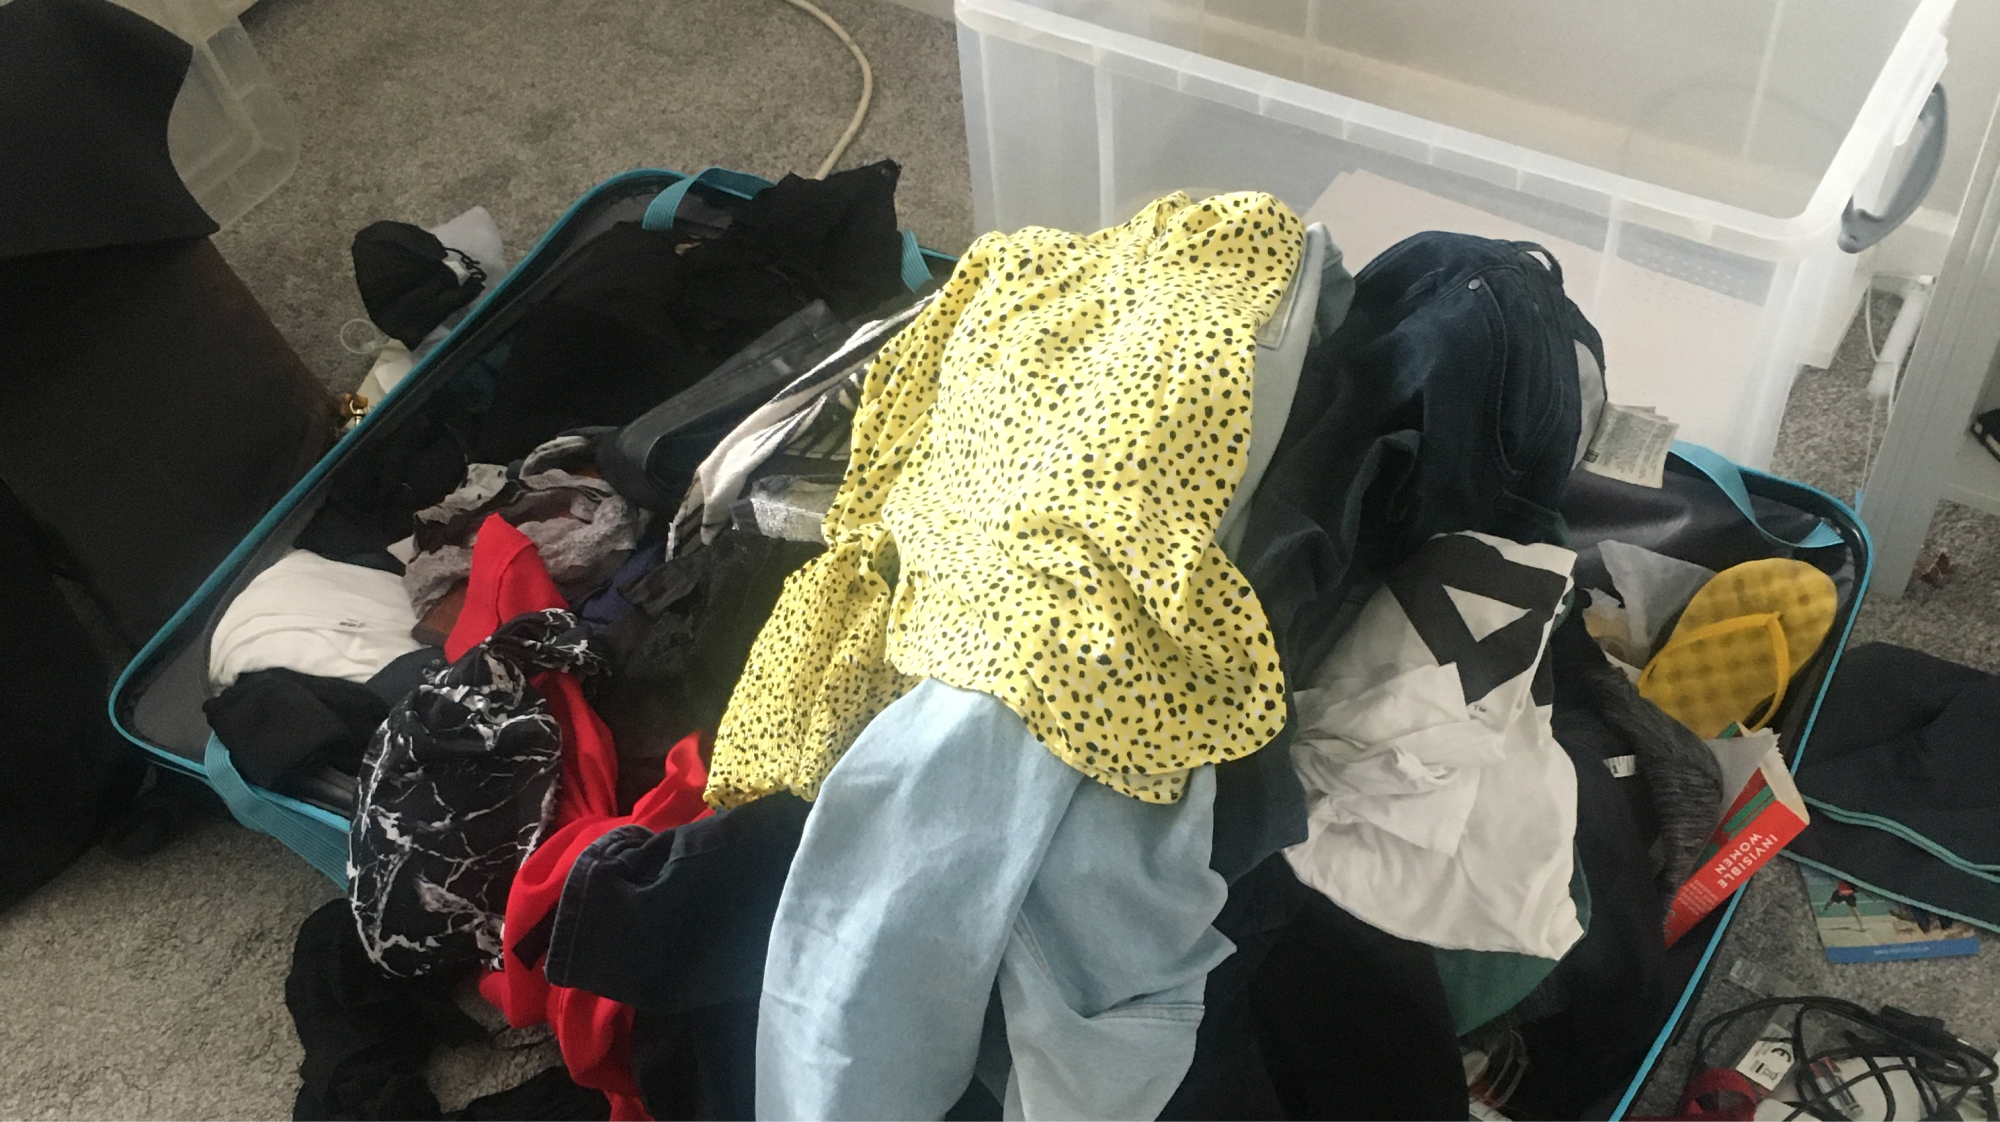 A suitcase filled with random clothes and stuff in a messy room